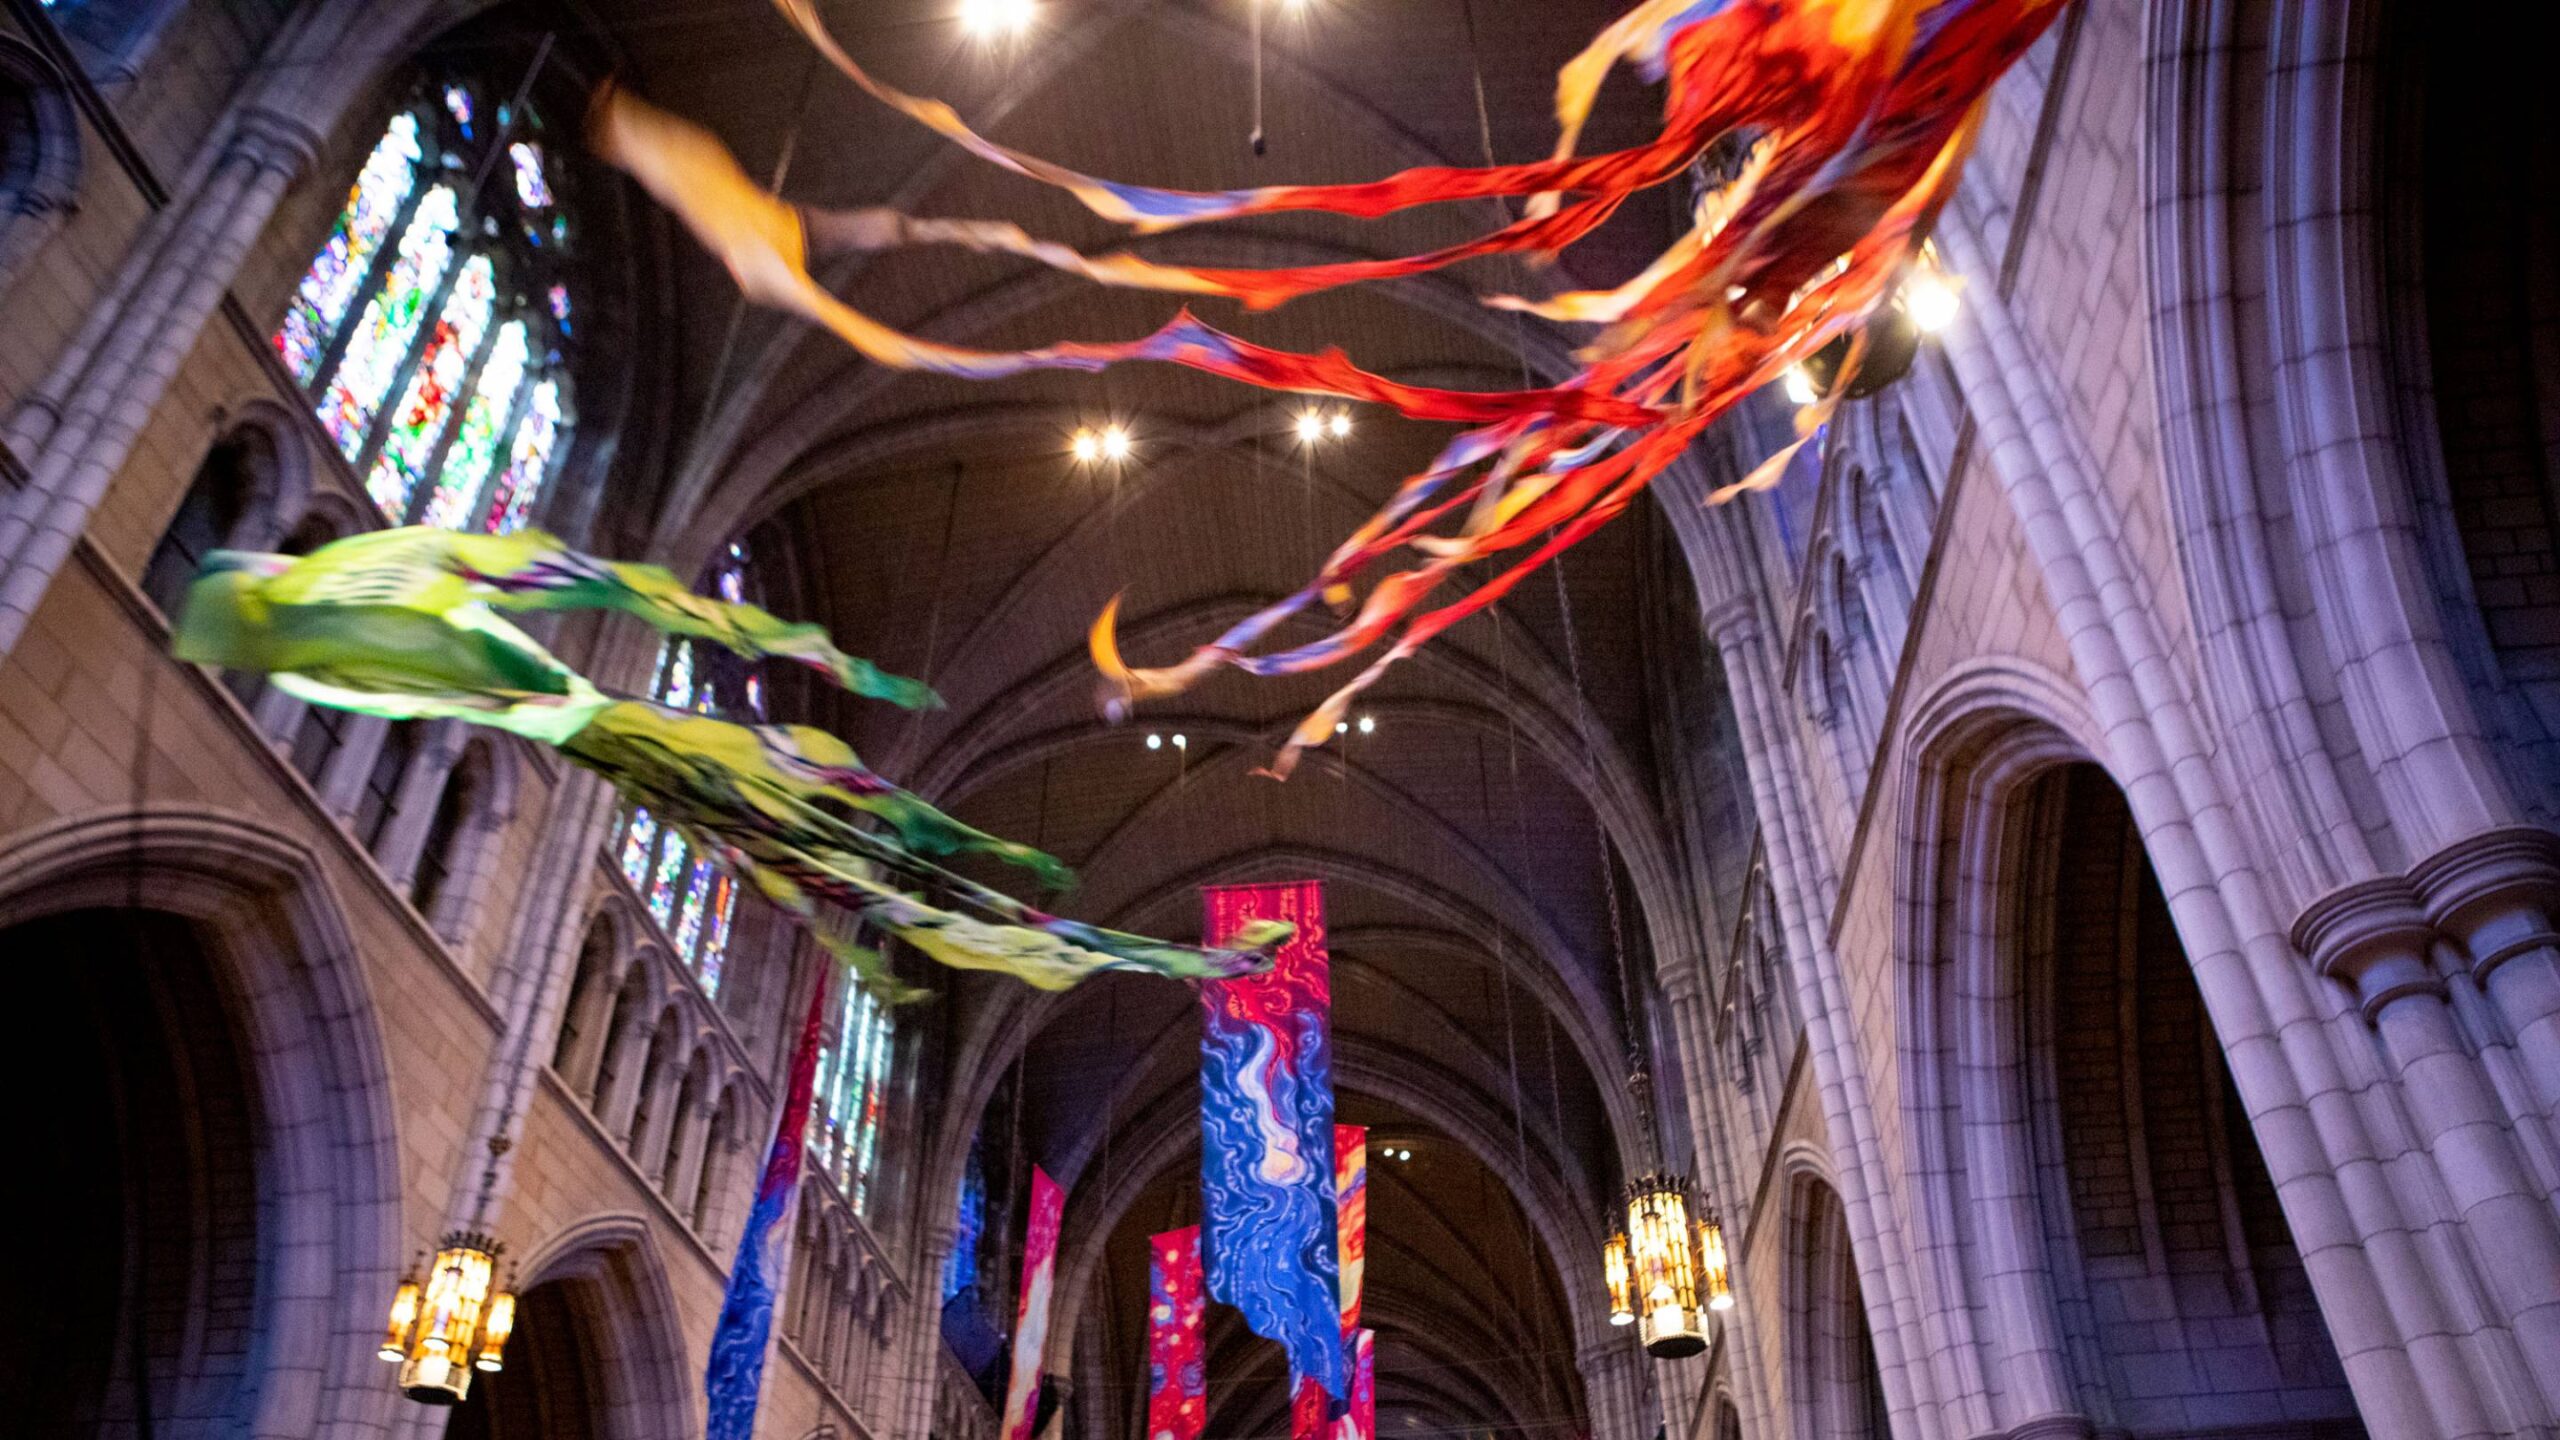 Chapel ceiling with flying colorful banners.